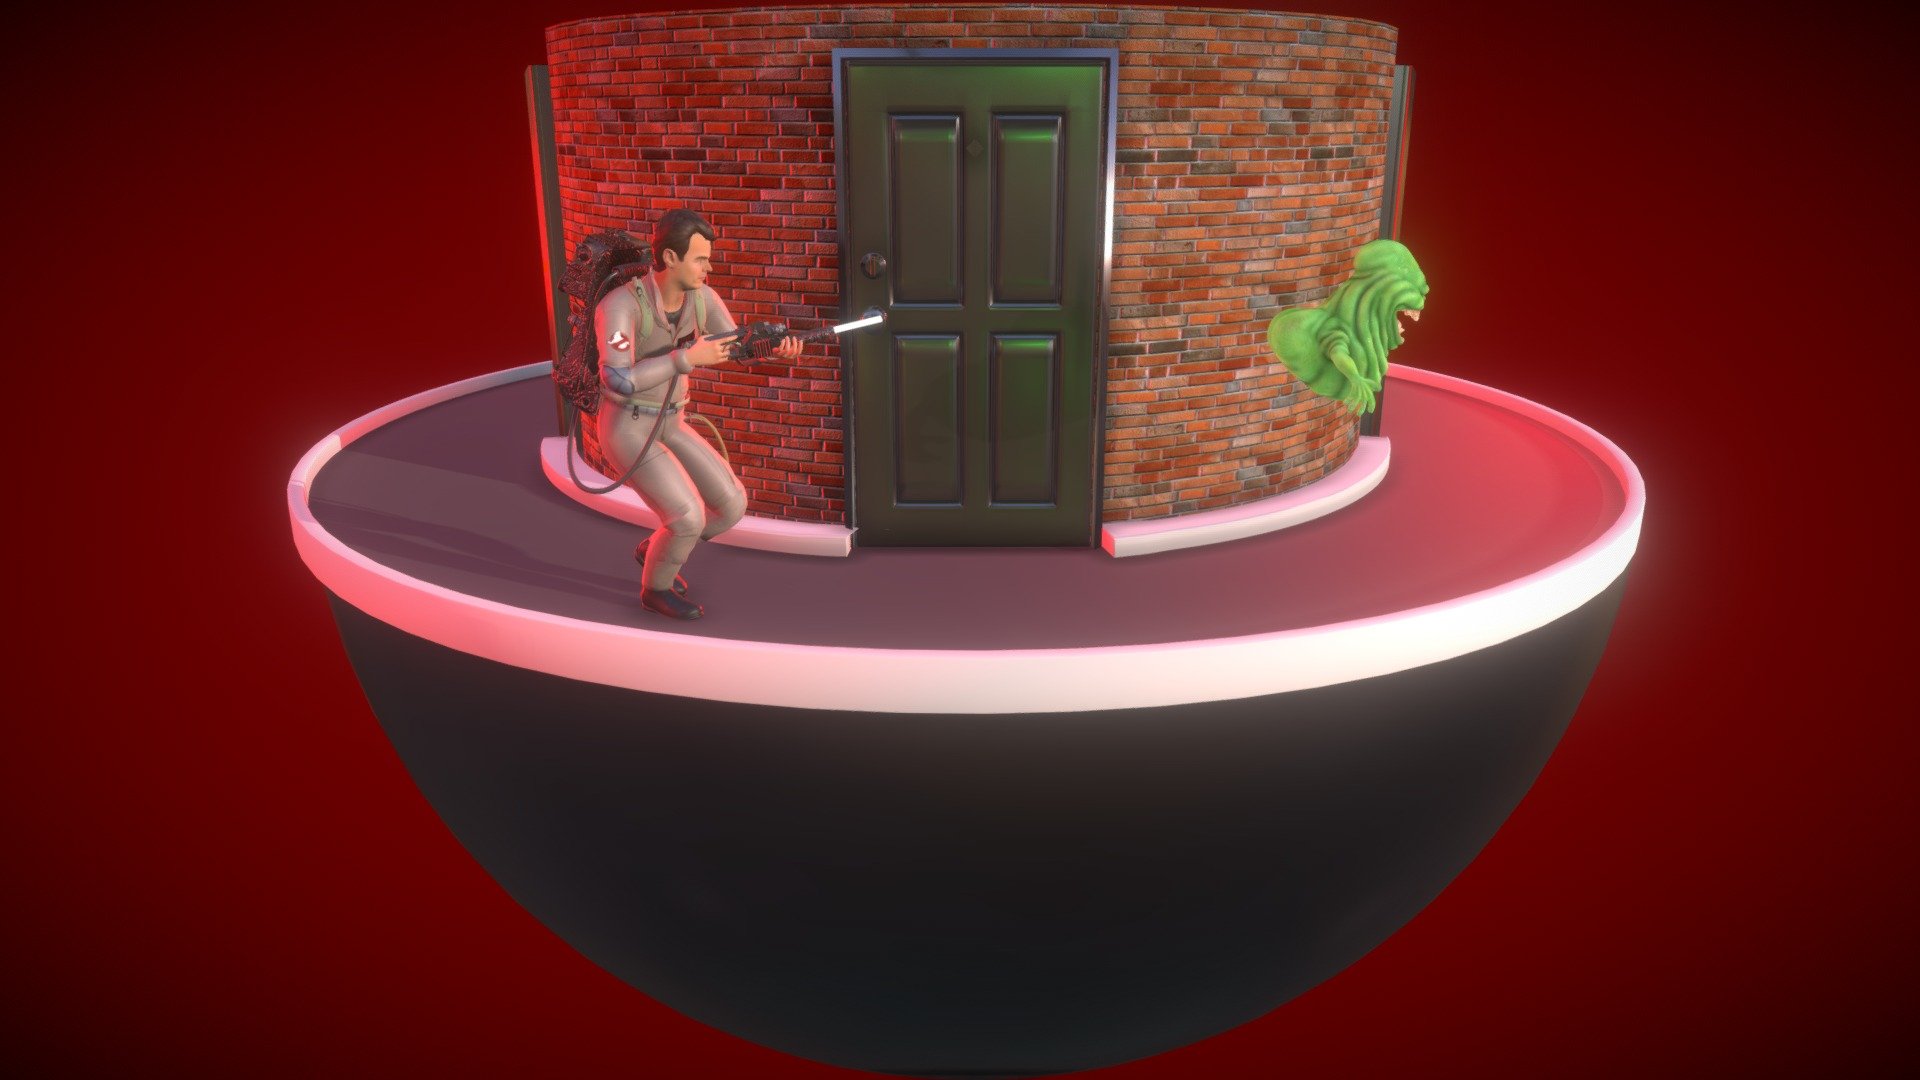 Dr. Ray Stantz chasing Slimer. Ghostbusters! Animated/designed in Cinema 4D 3d model